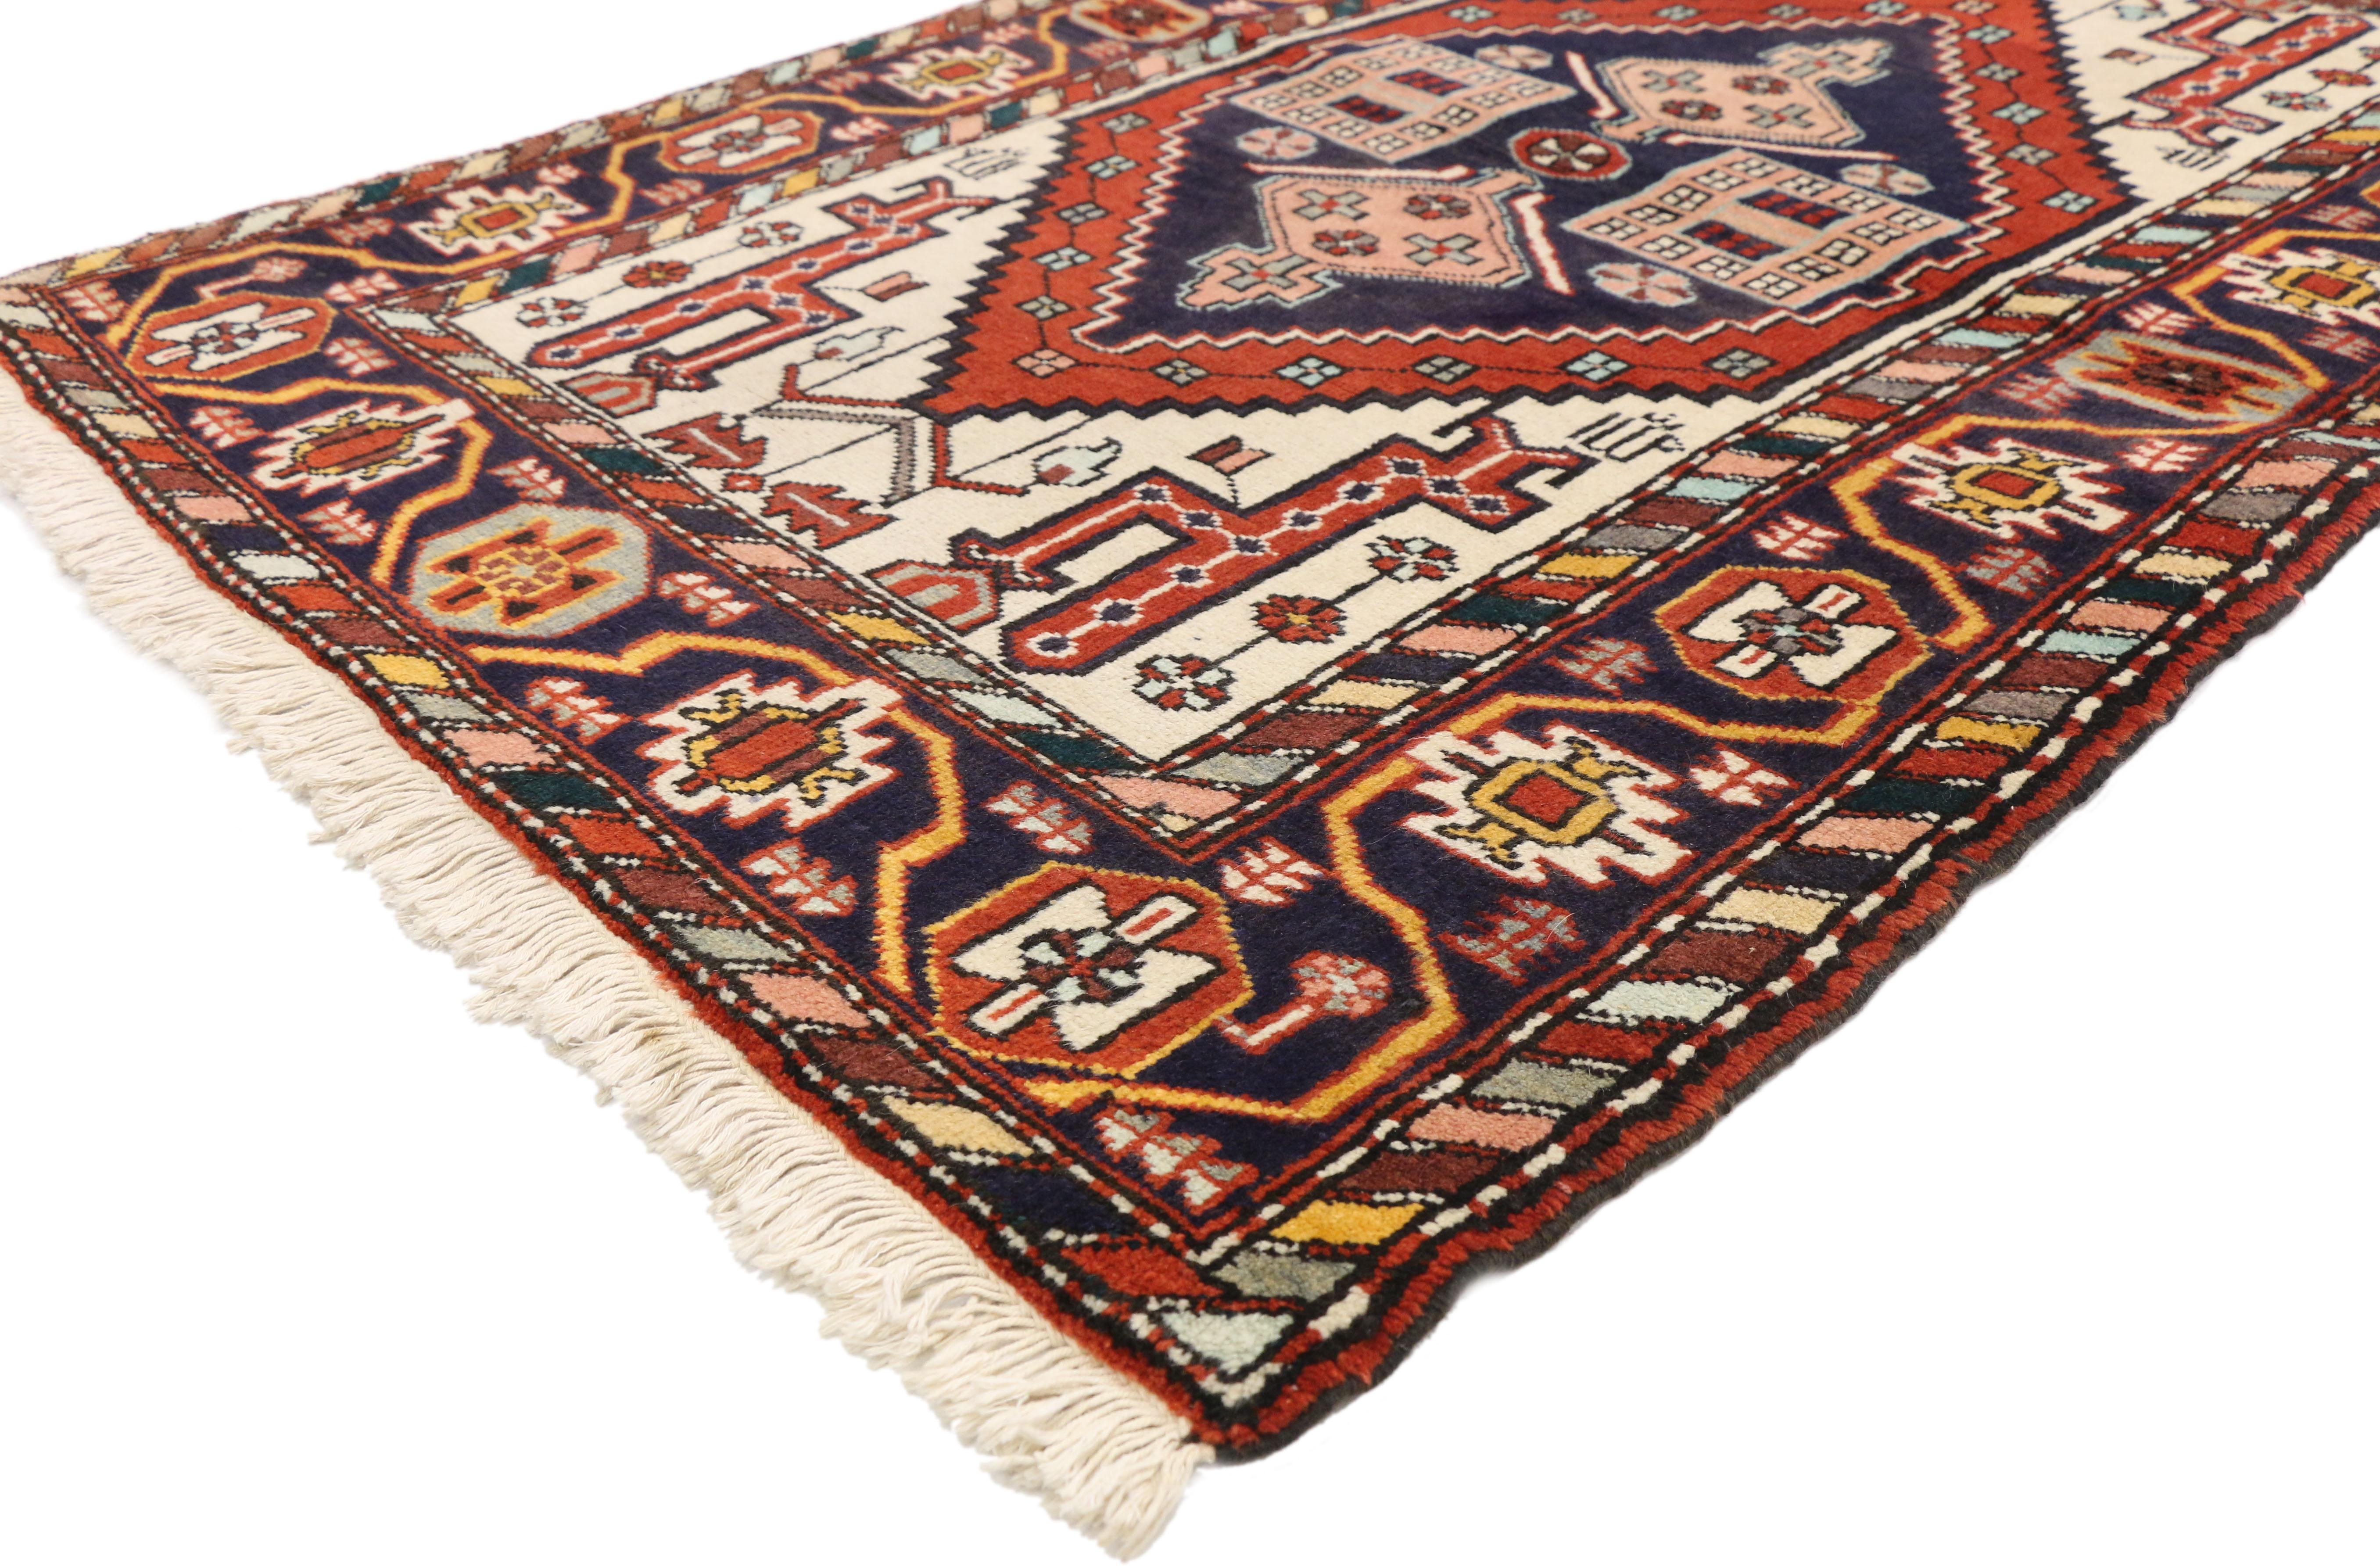 Full of character and stately presence, this vintage Heriz Persian rug with modern tribal style showcases an extravagant geometric design rendered in traditional colors of navy, red, blue and ivory-white with accents of pink, baby blue and apricot.